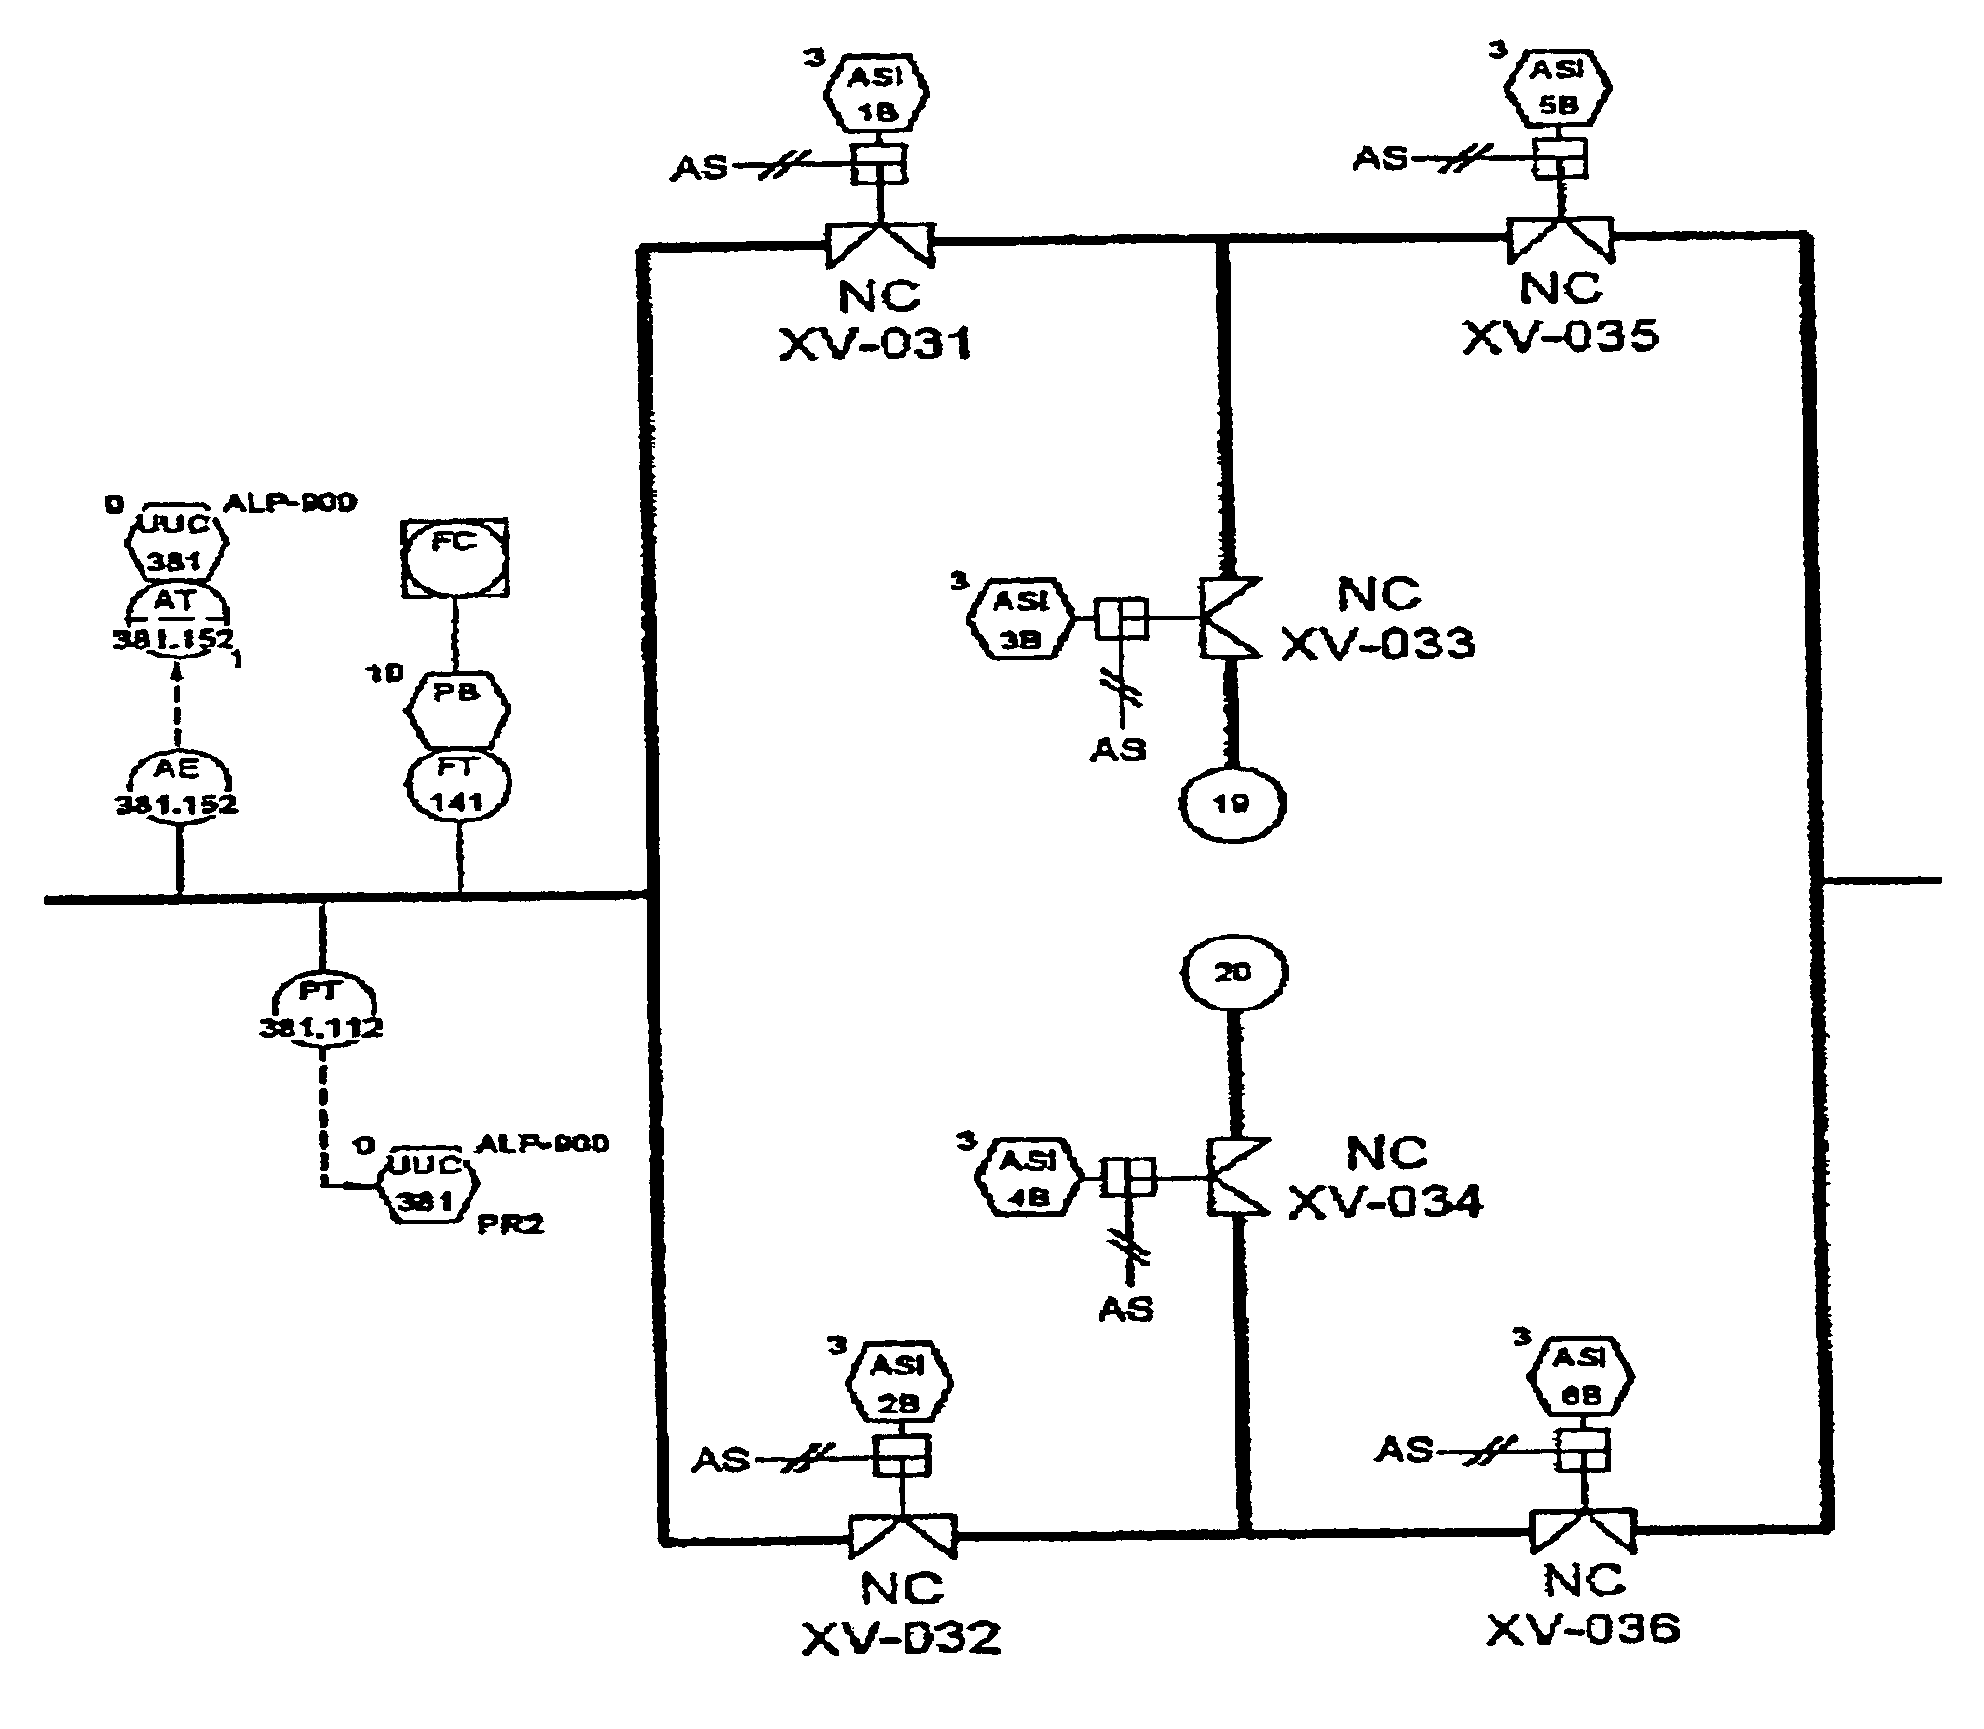 System for configuring a chemical separation system